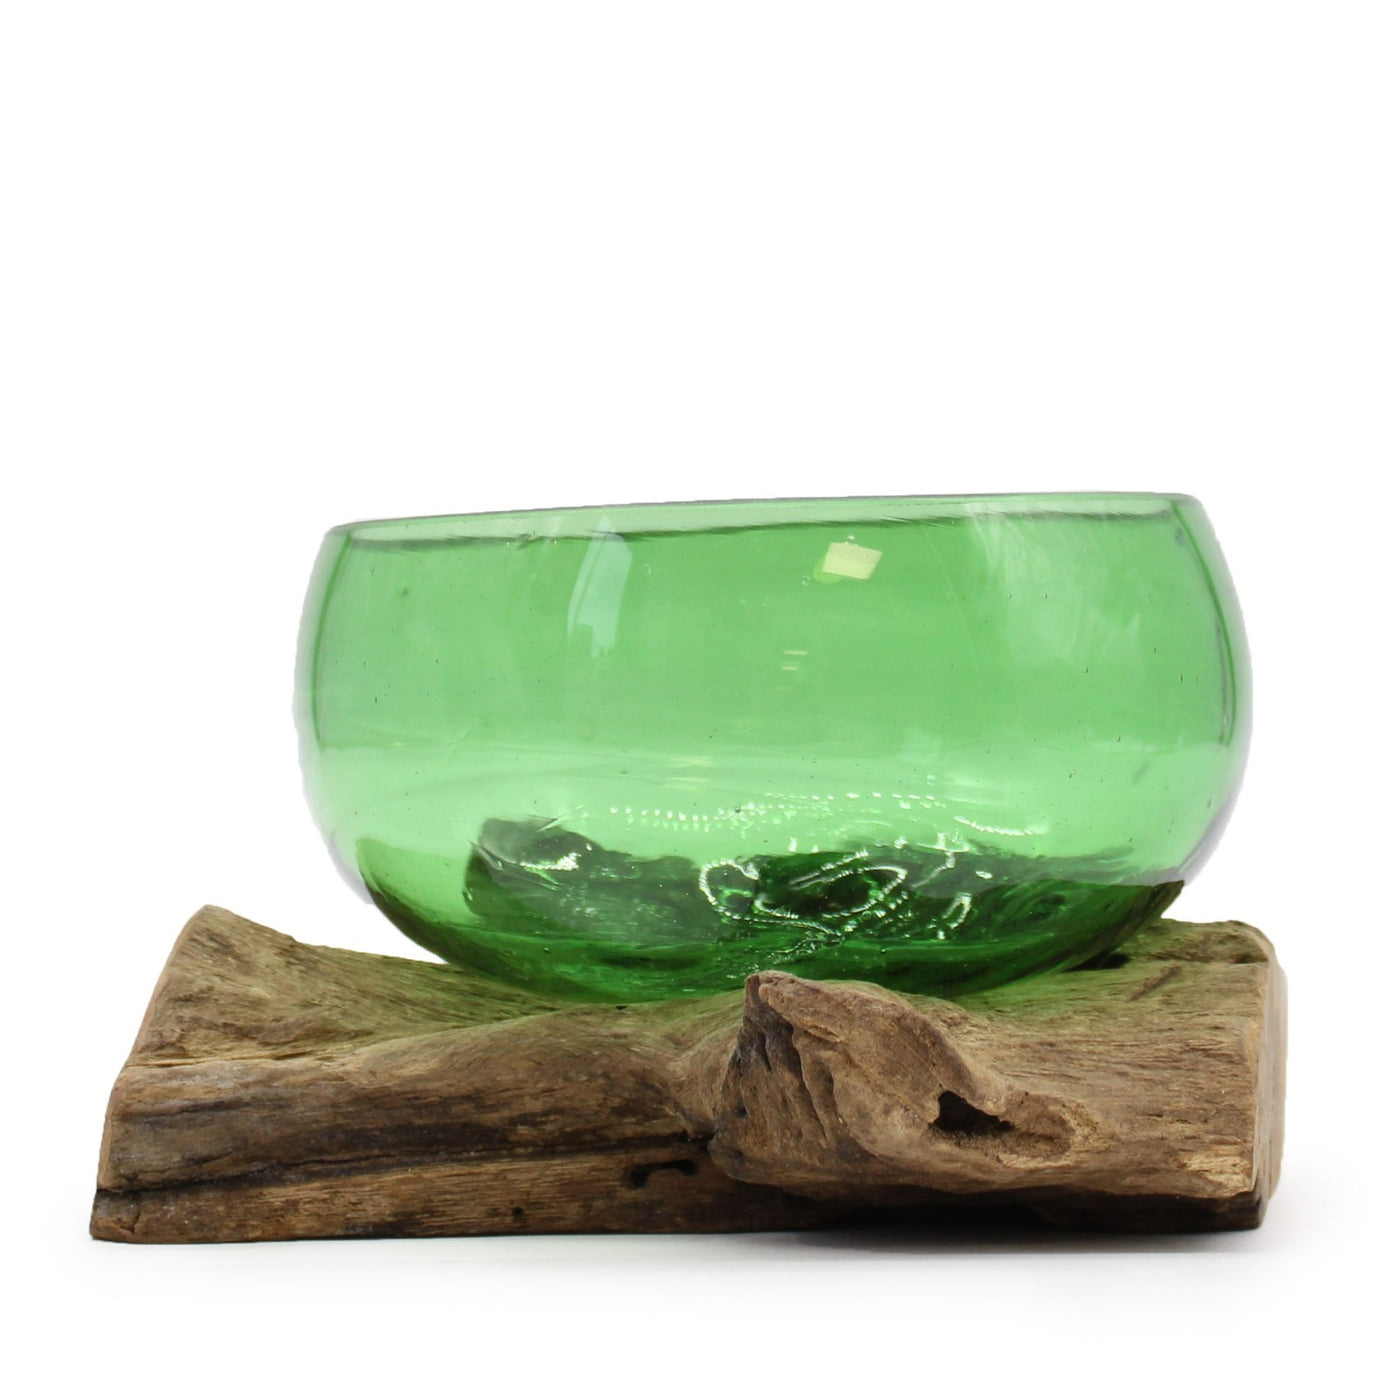 Molten Green Recycled Glass Fruit Bowl On Wooden Base. 